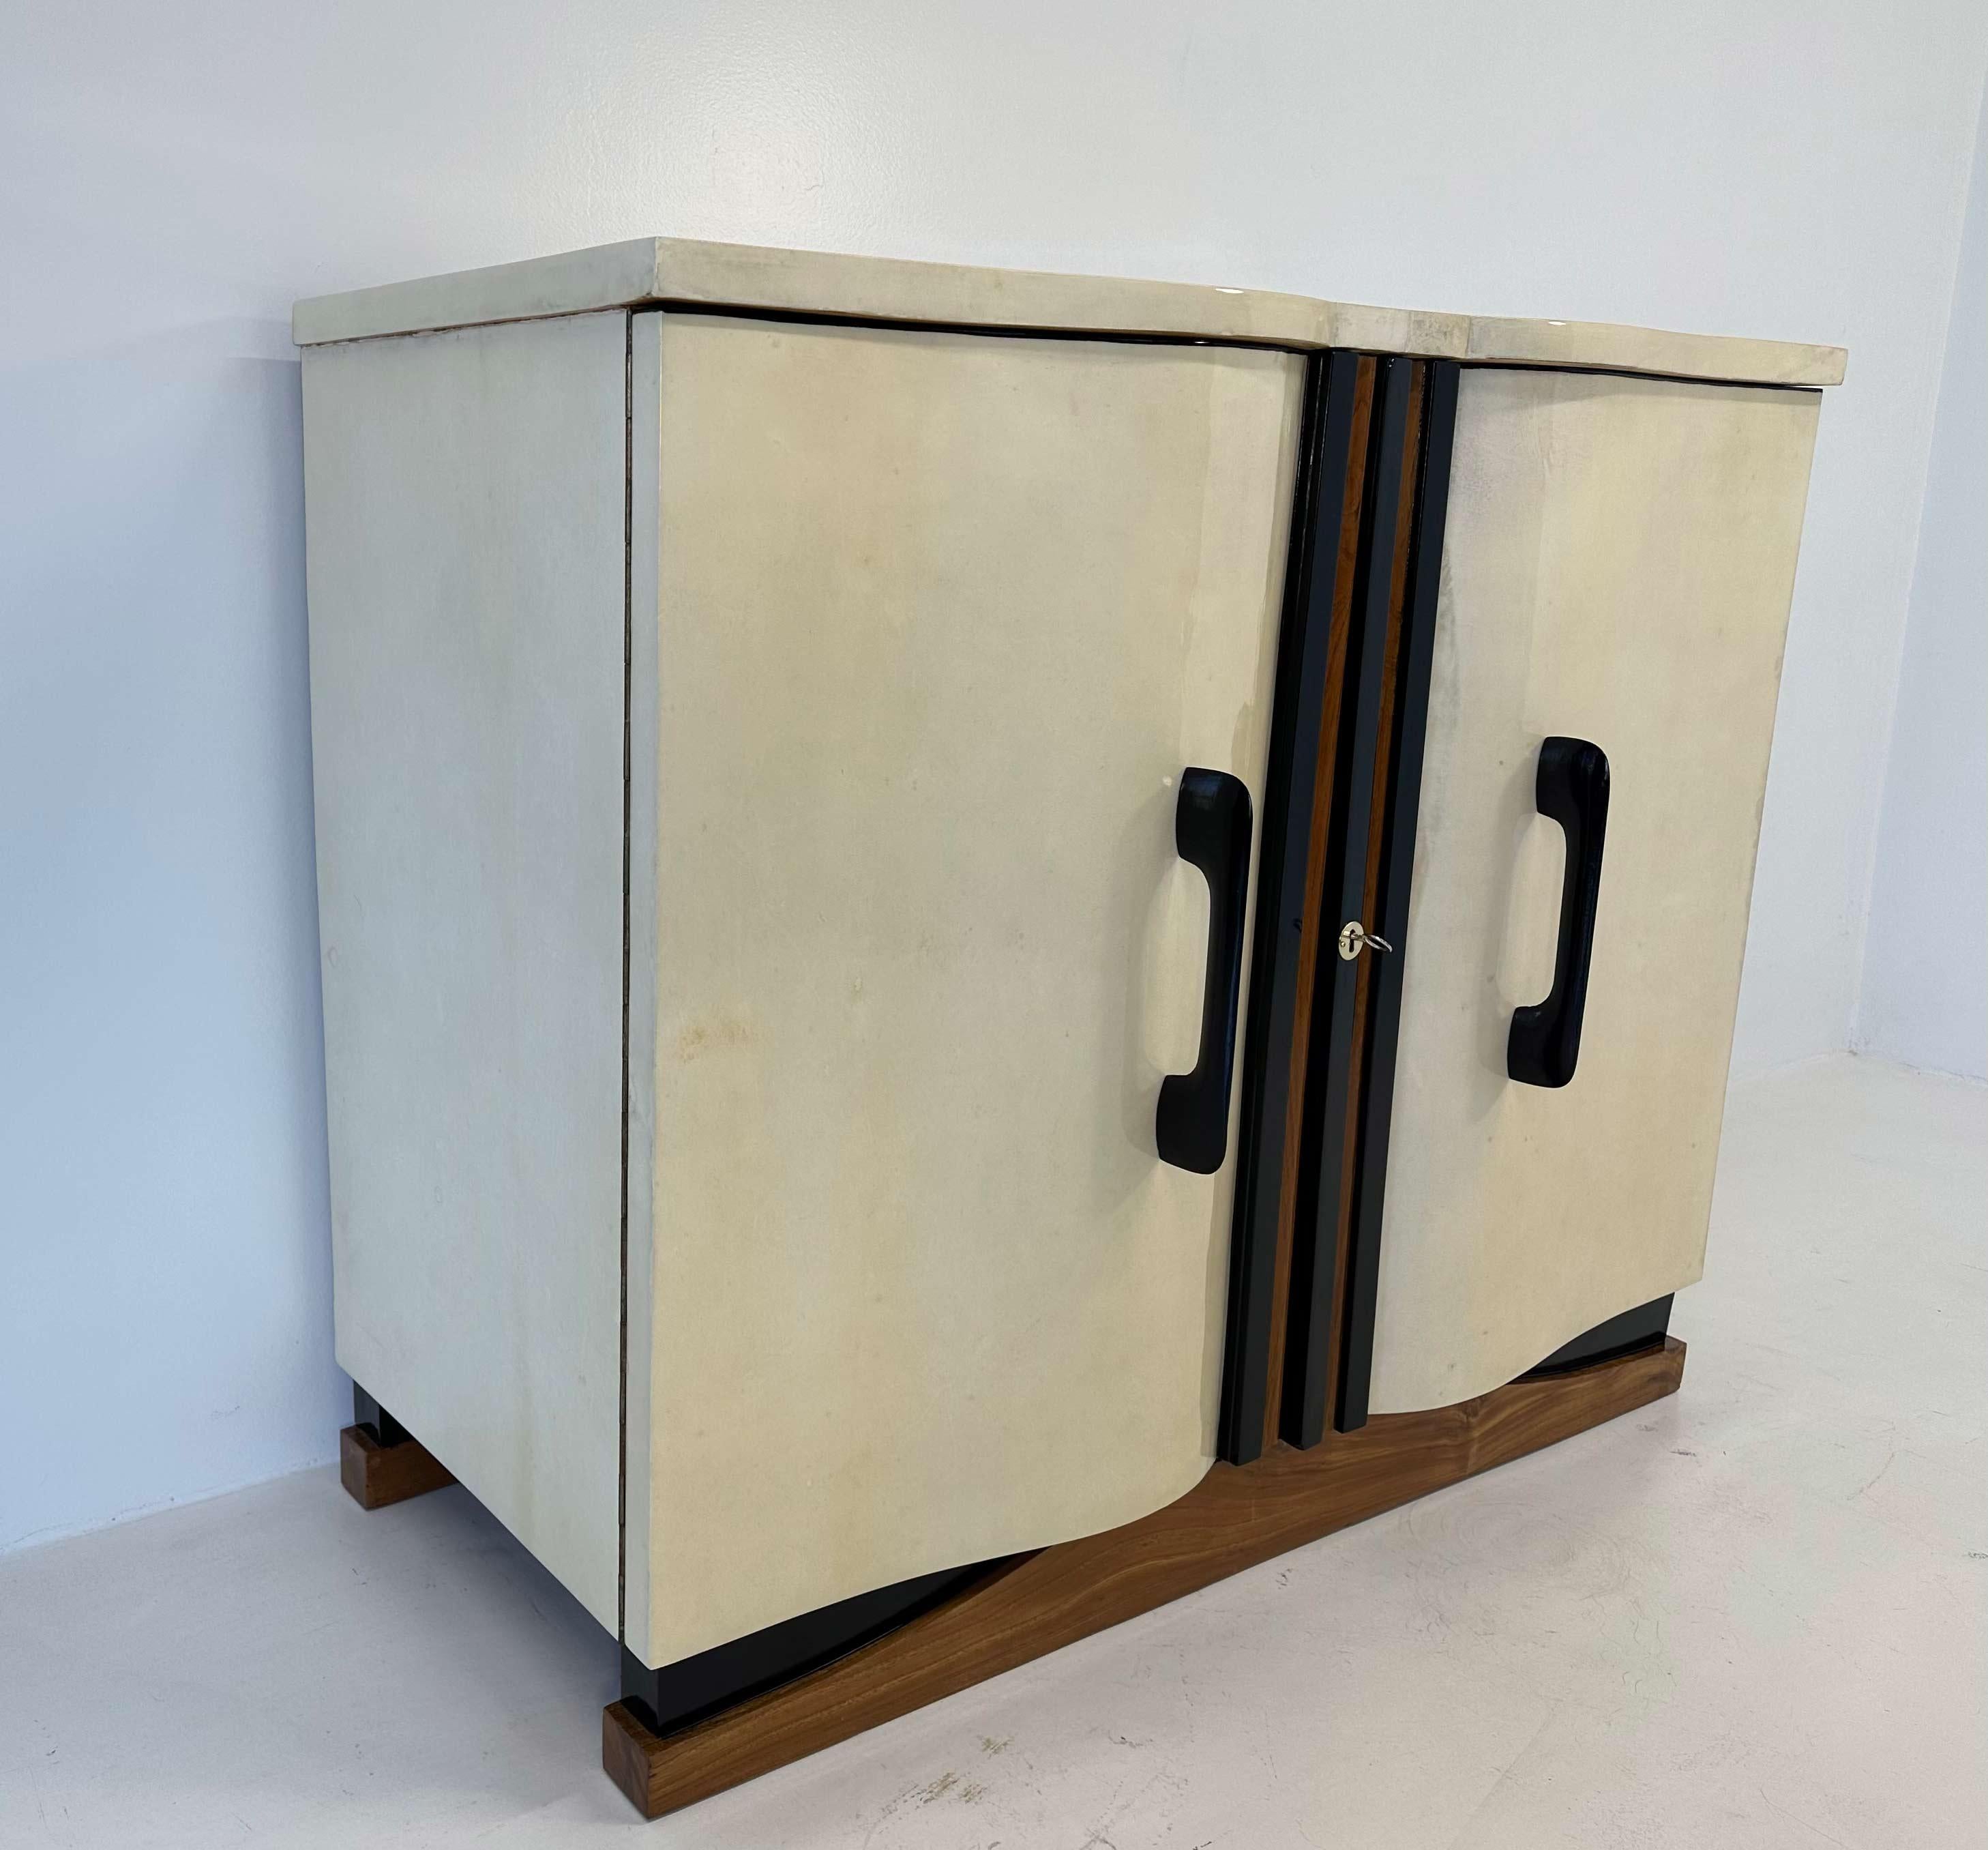 Italian Art Deco Parchment, Walnut and Black Cabinet, Attr. to Ulrich, 1936 For Sale 1